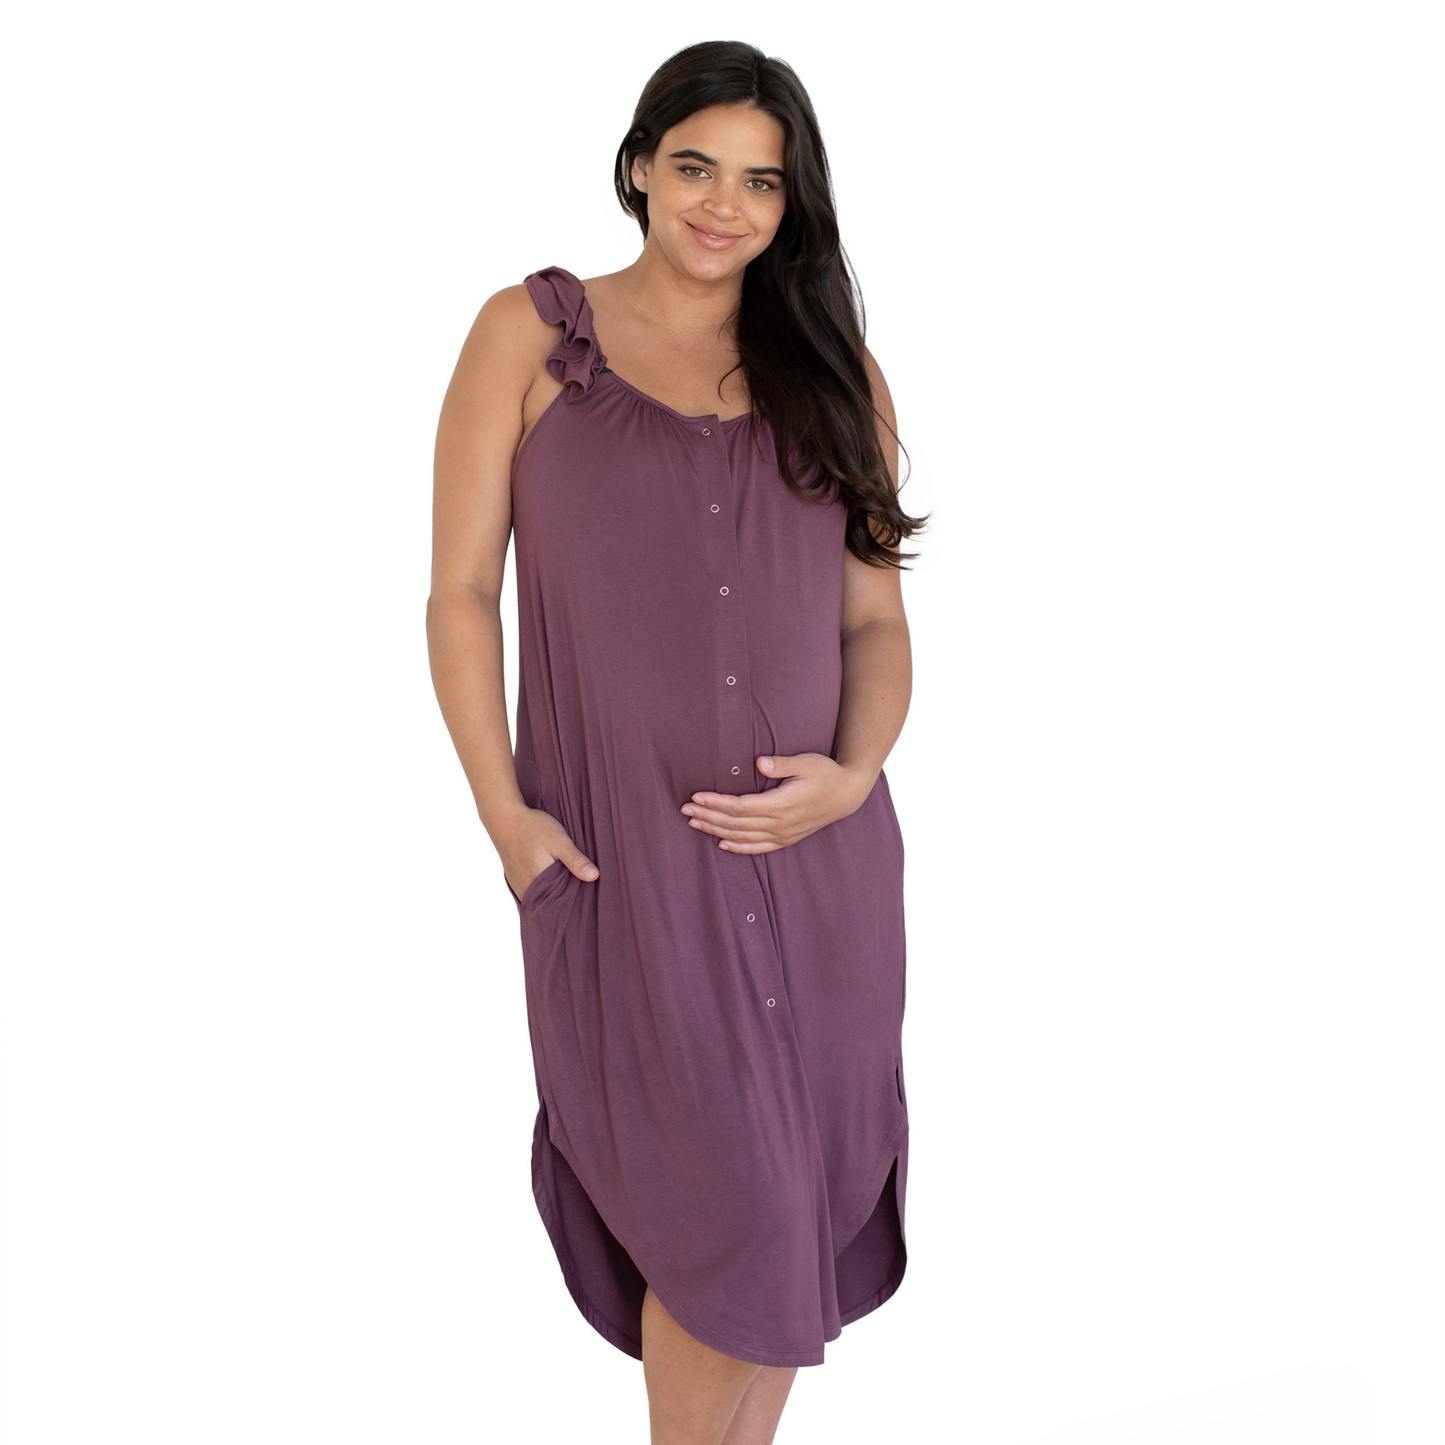 Ruffle Strap Labor & Delivery Gown- Burgundy Plum